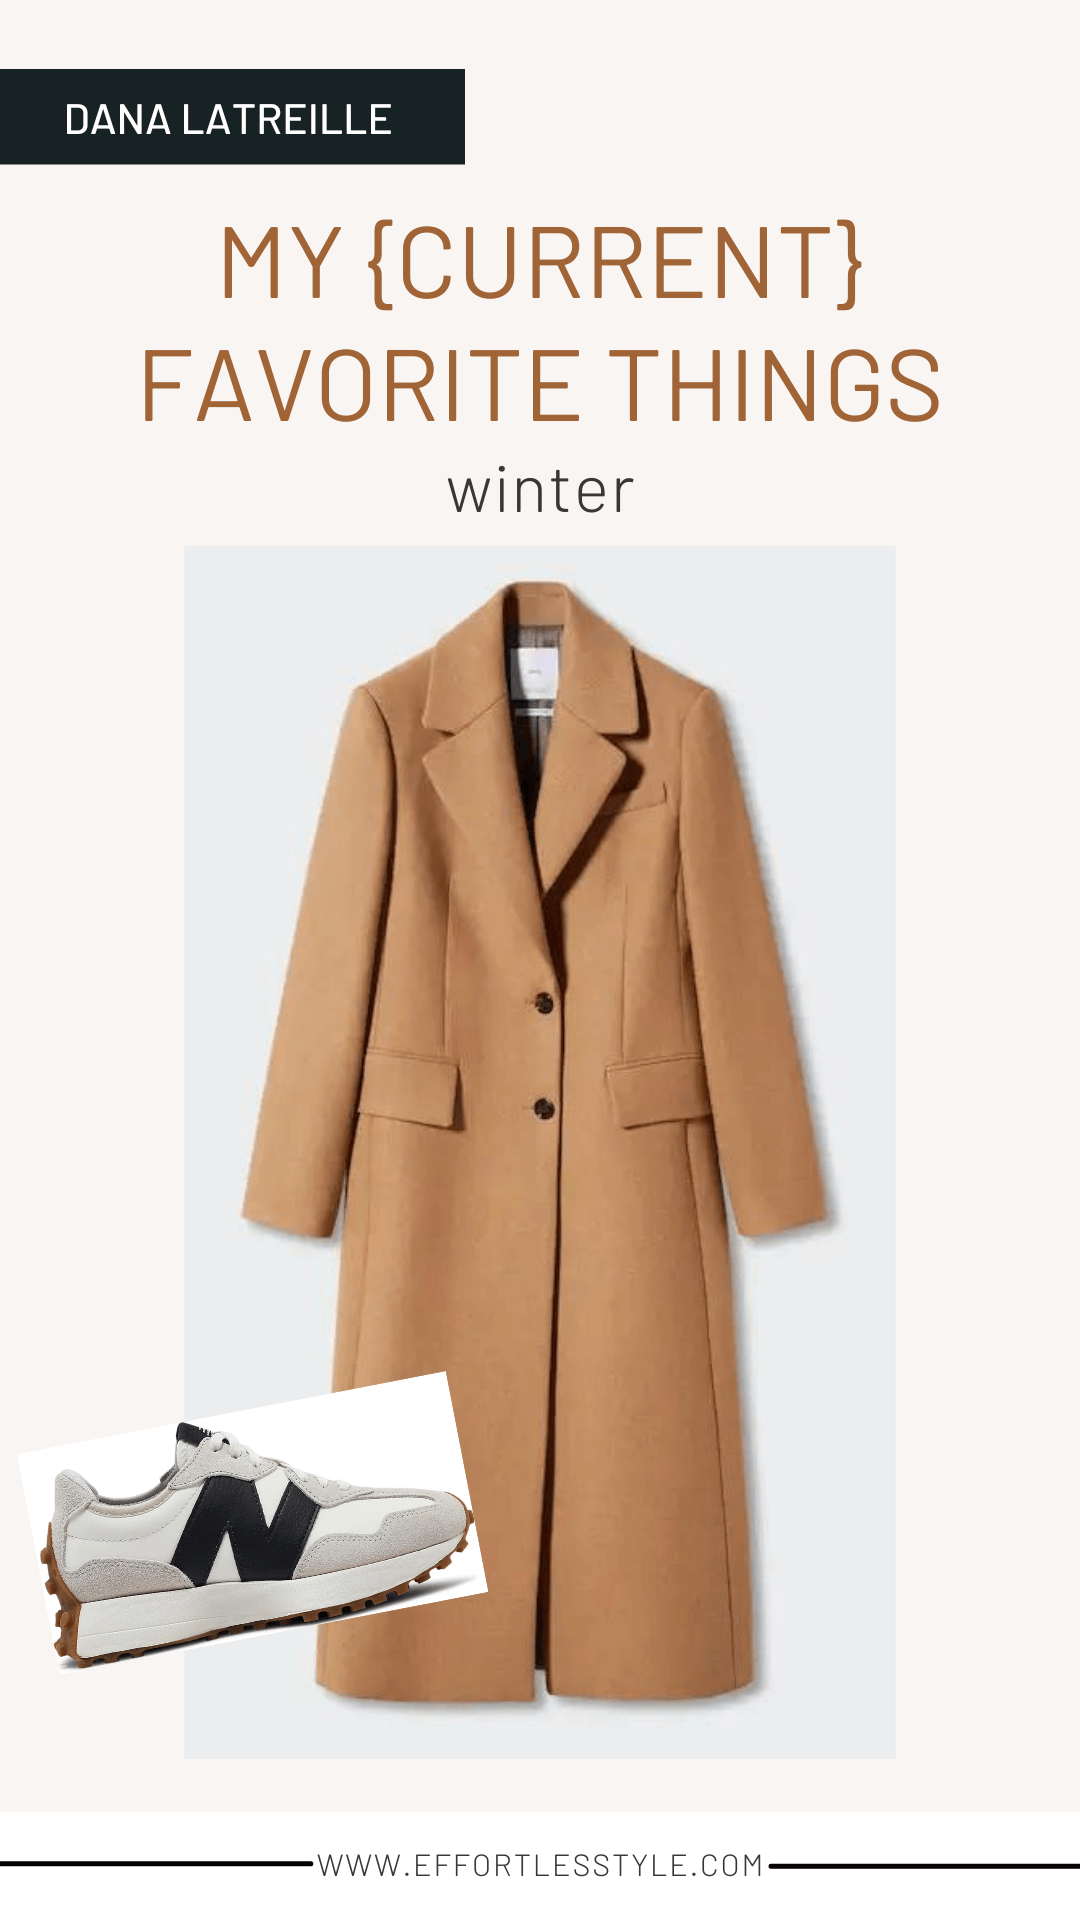 Style Picks - Dana’s Current Favorite Things For Winter